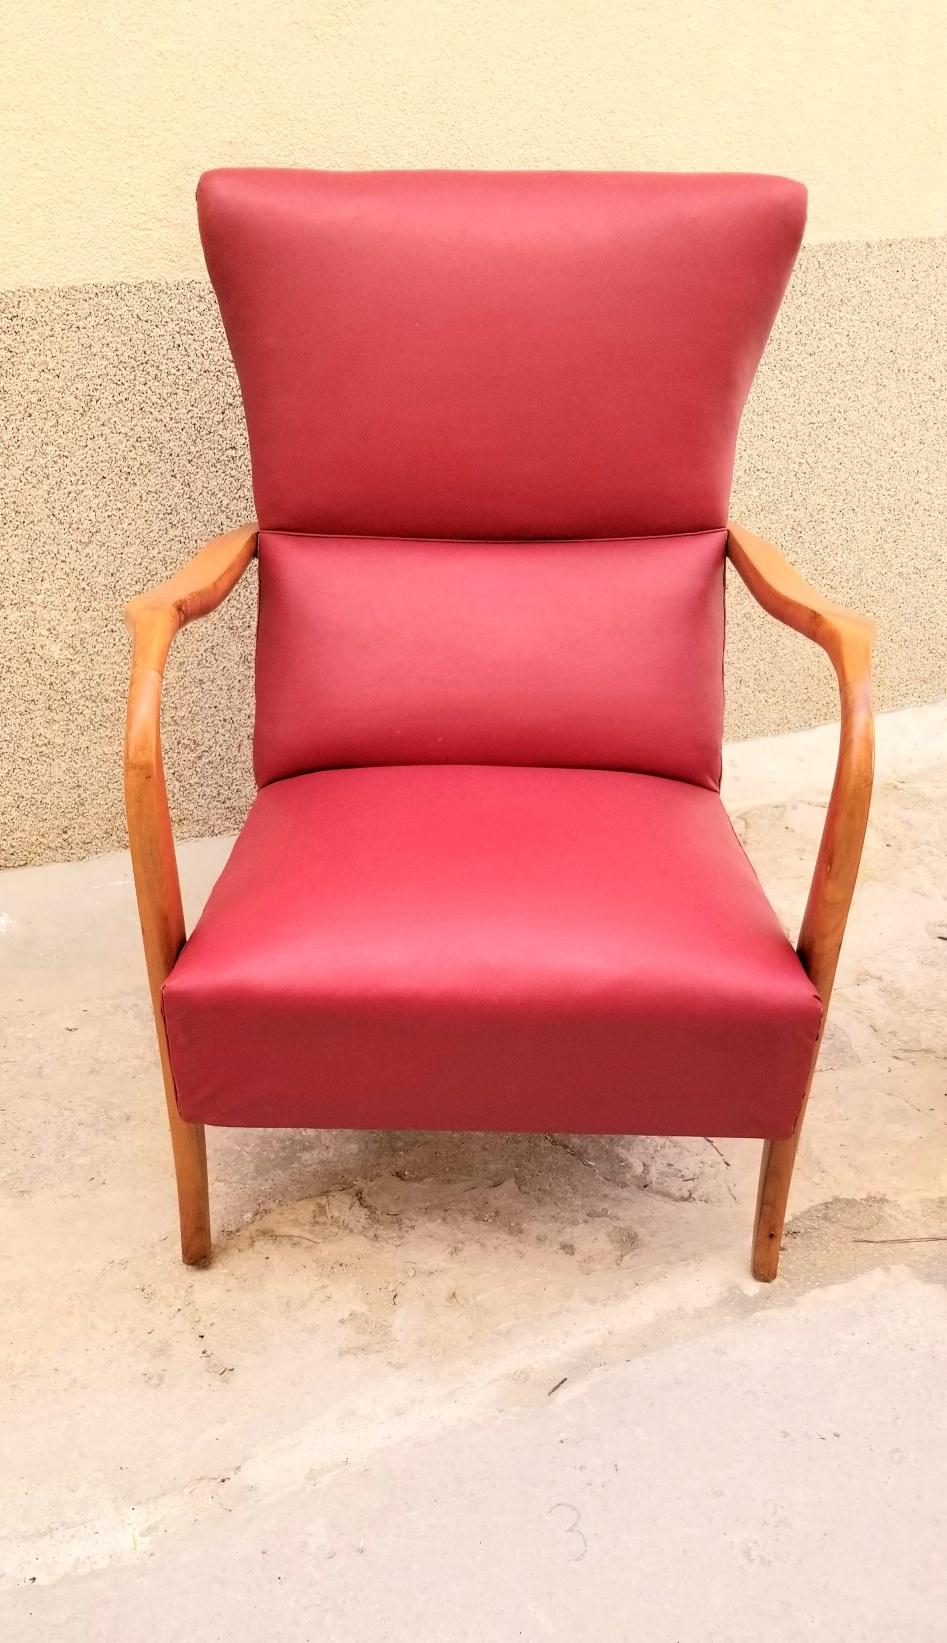 Italian pair of chairs ,sculptural look and comfortable in original good condition.
Shipping to US continental in home delivery $500
 